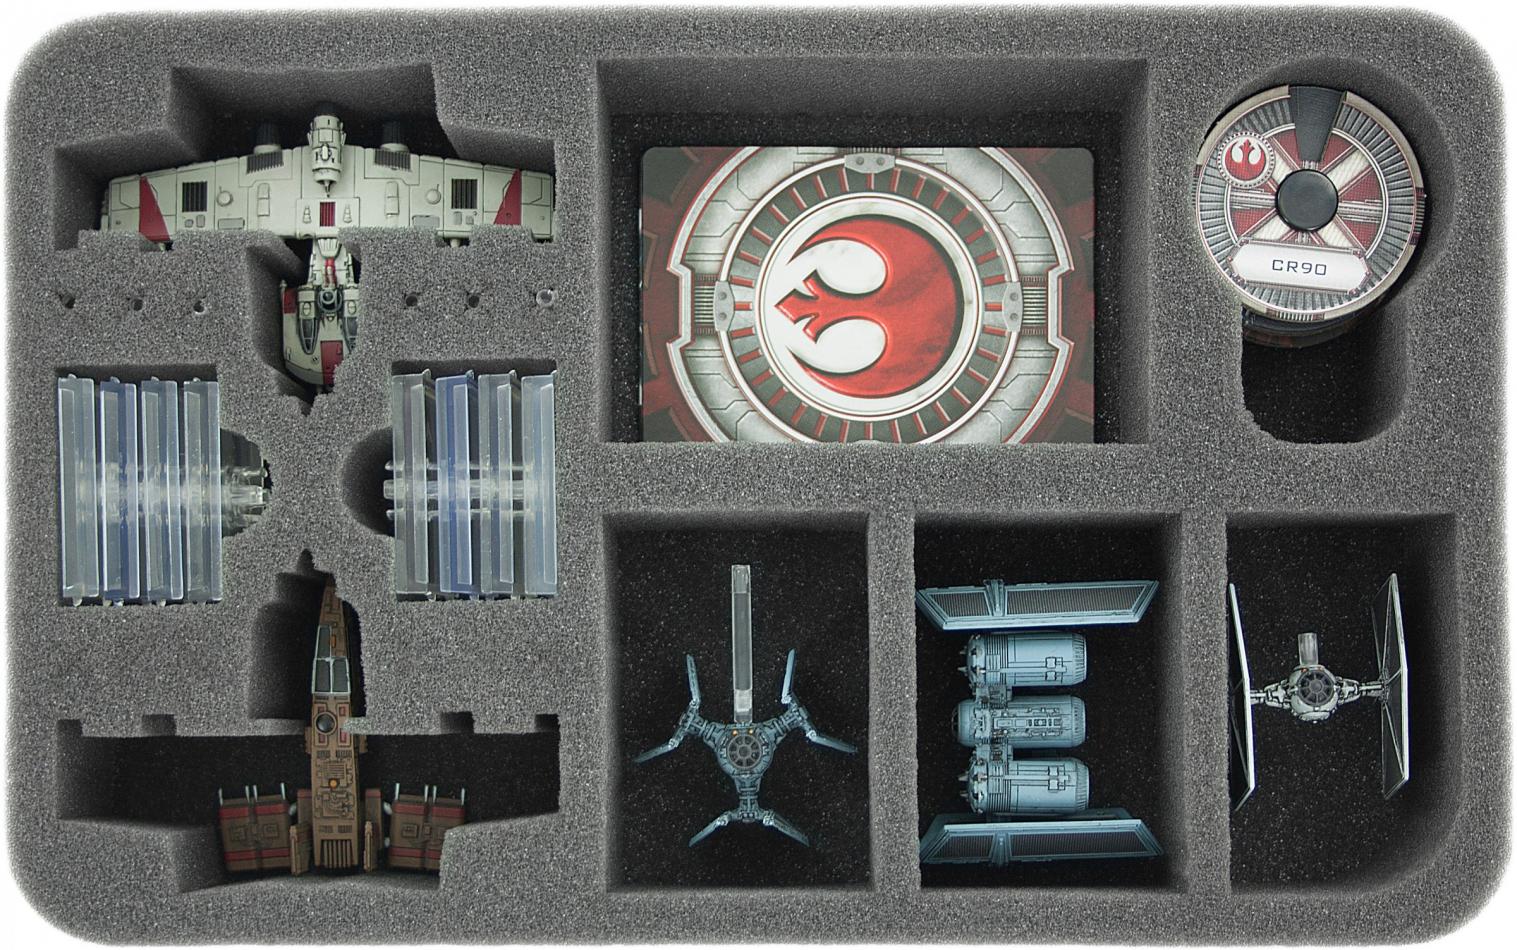 HSDE050BO foam tray for Star Wars X-WING 2 x K-Wing, 3 Ships, Dials, Cards and more